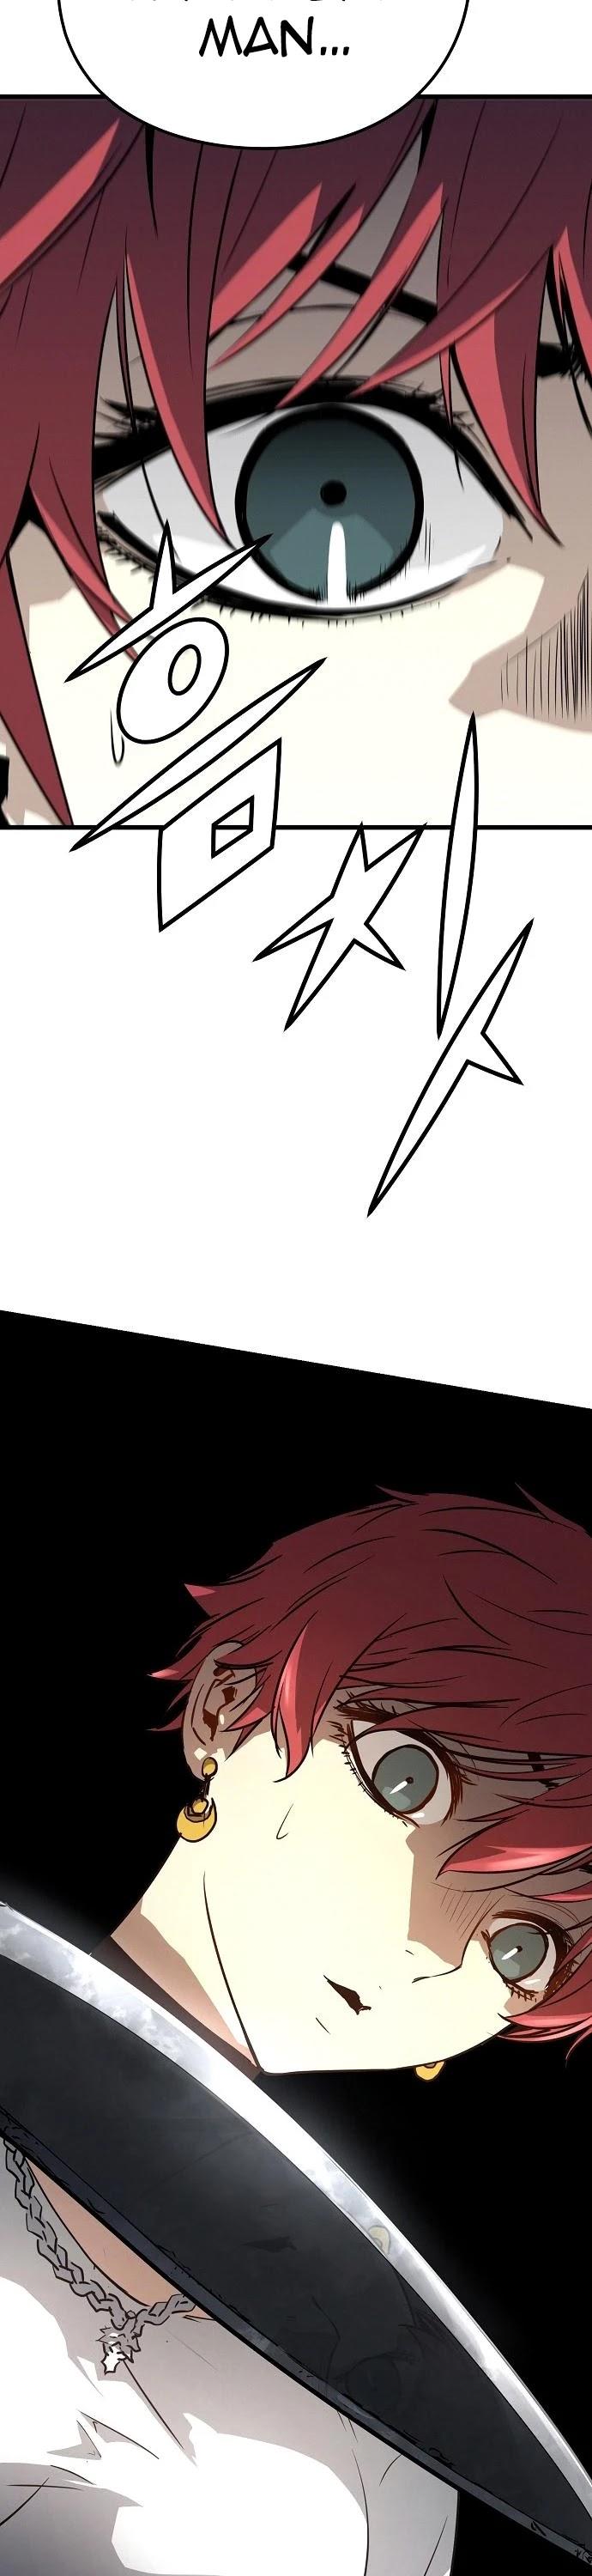 The Breaker: Eternal Force Chapter 8 page 6 - 